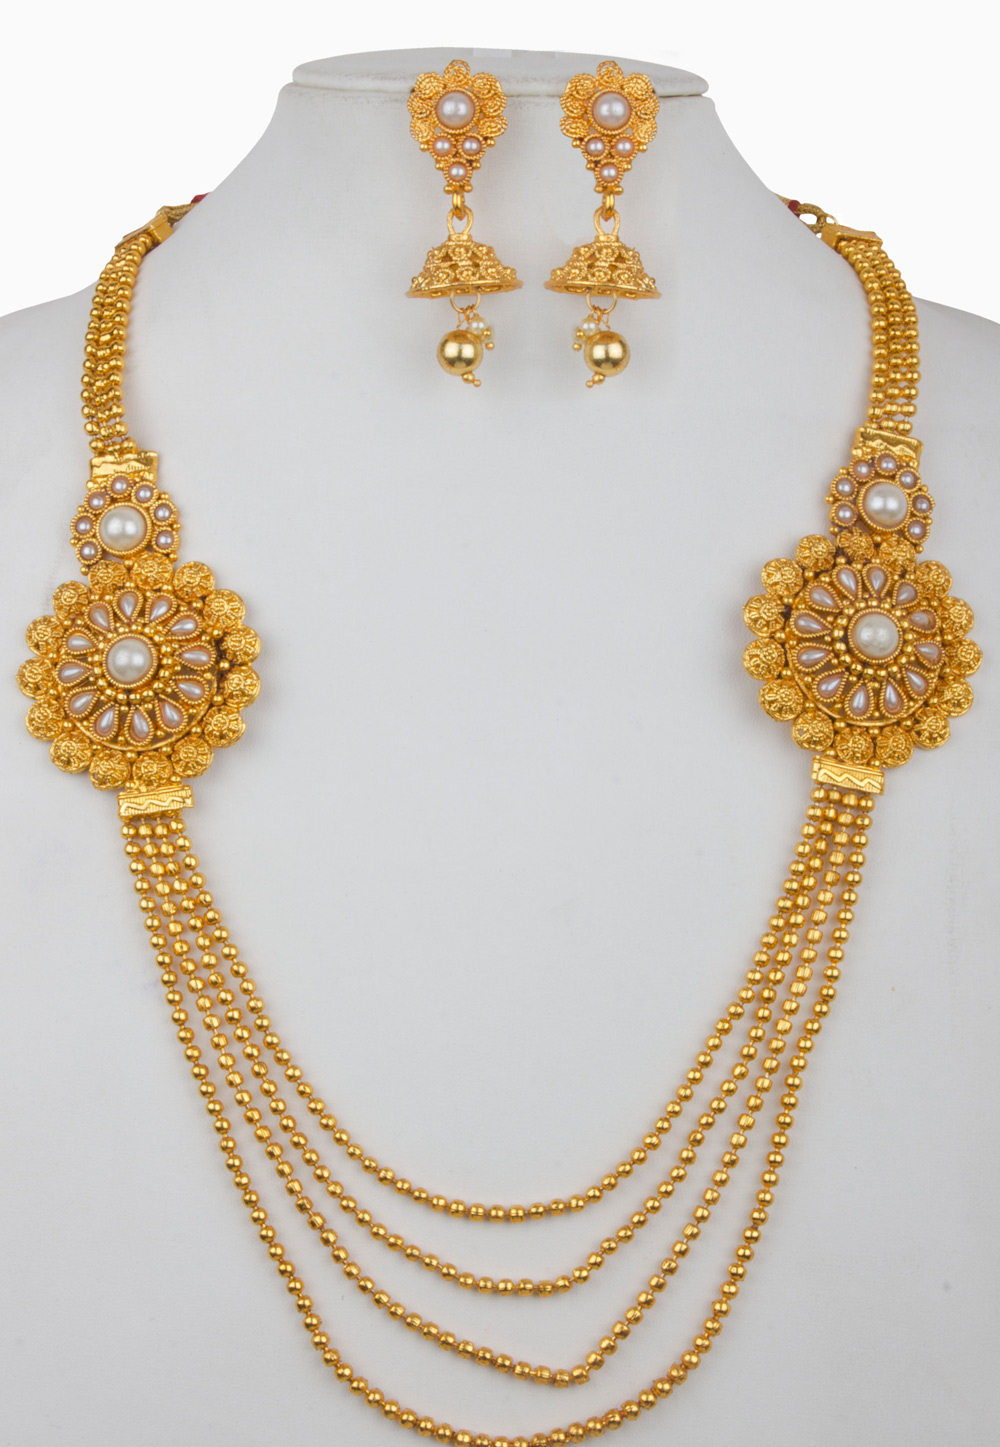 White Alloy Necklace With Earrings 157148